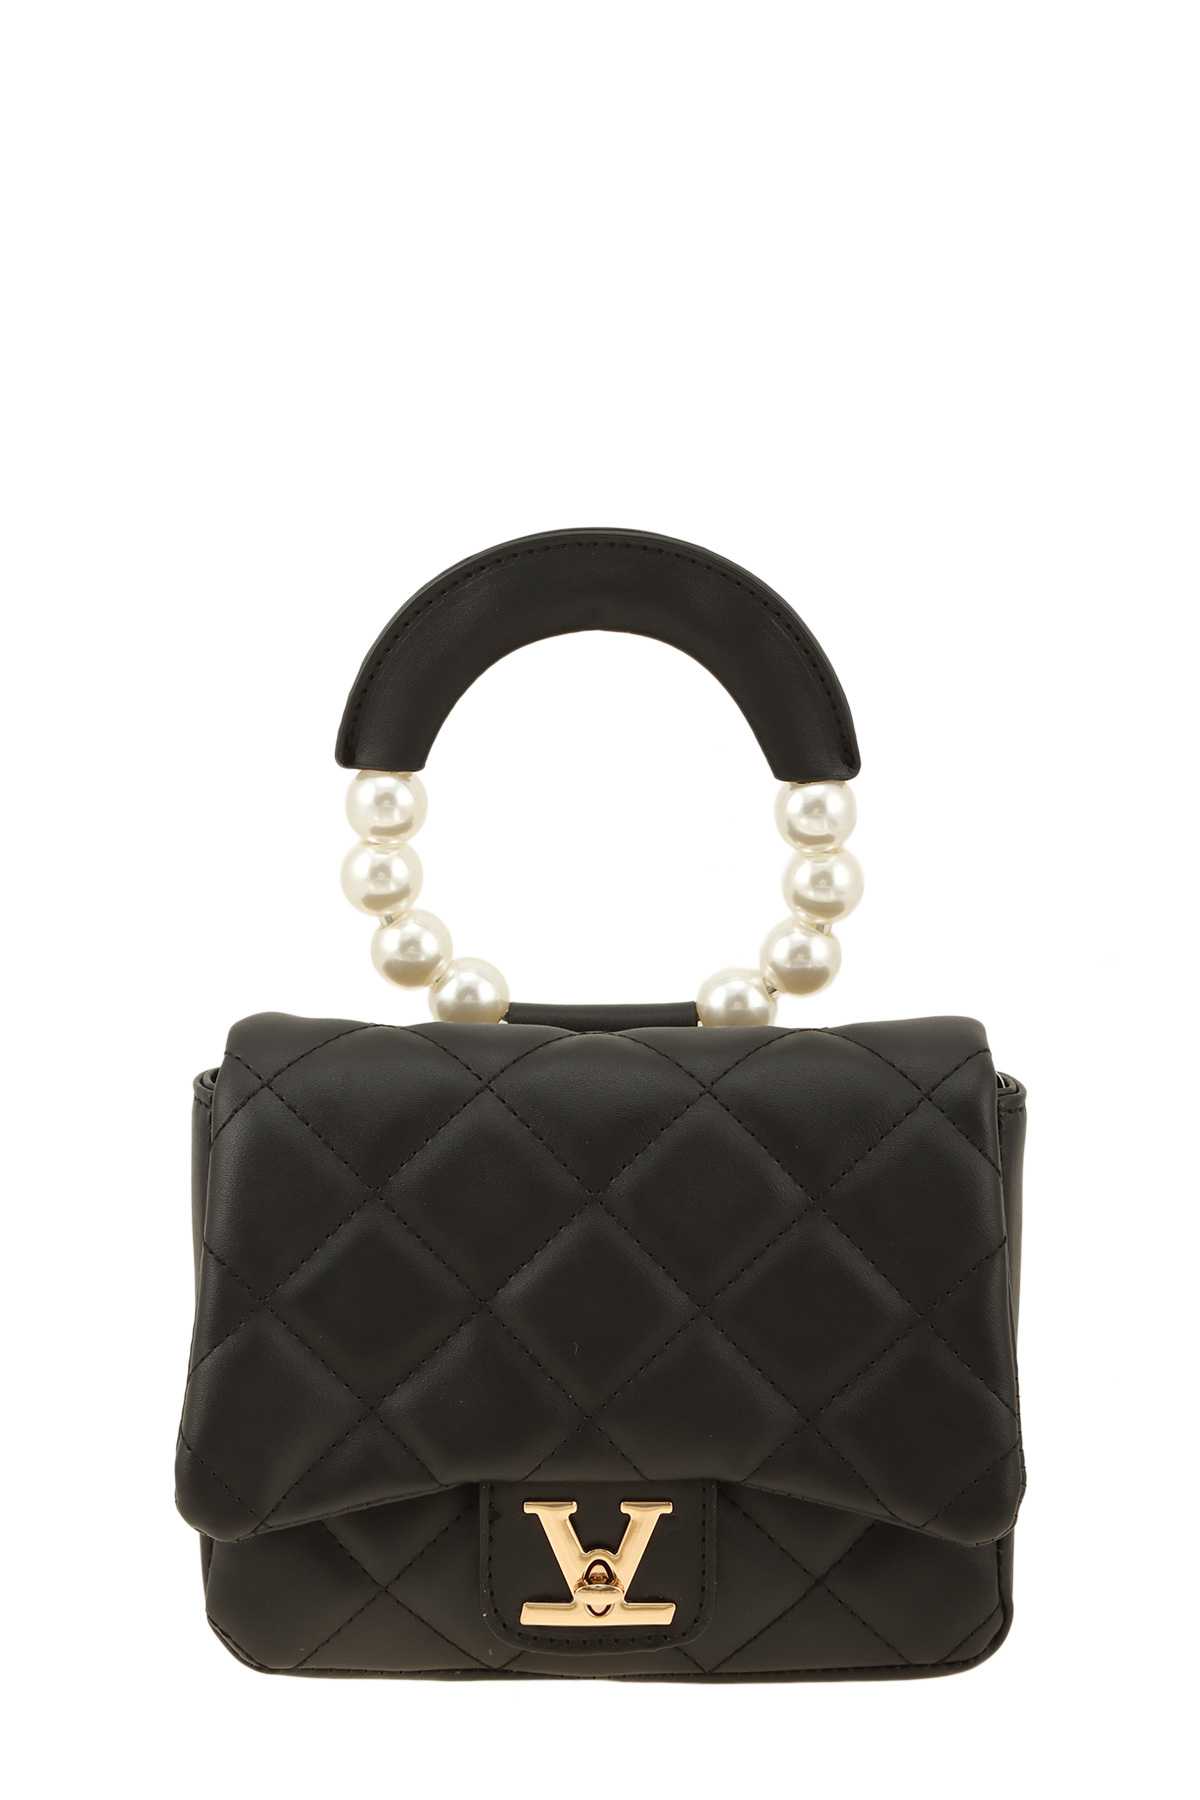 Diamond Quilted Bag with V Accent and Pearl Handle